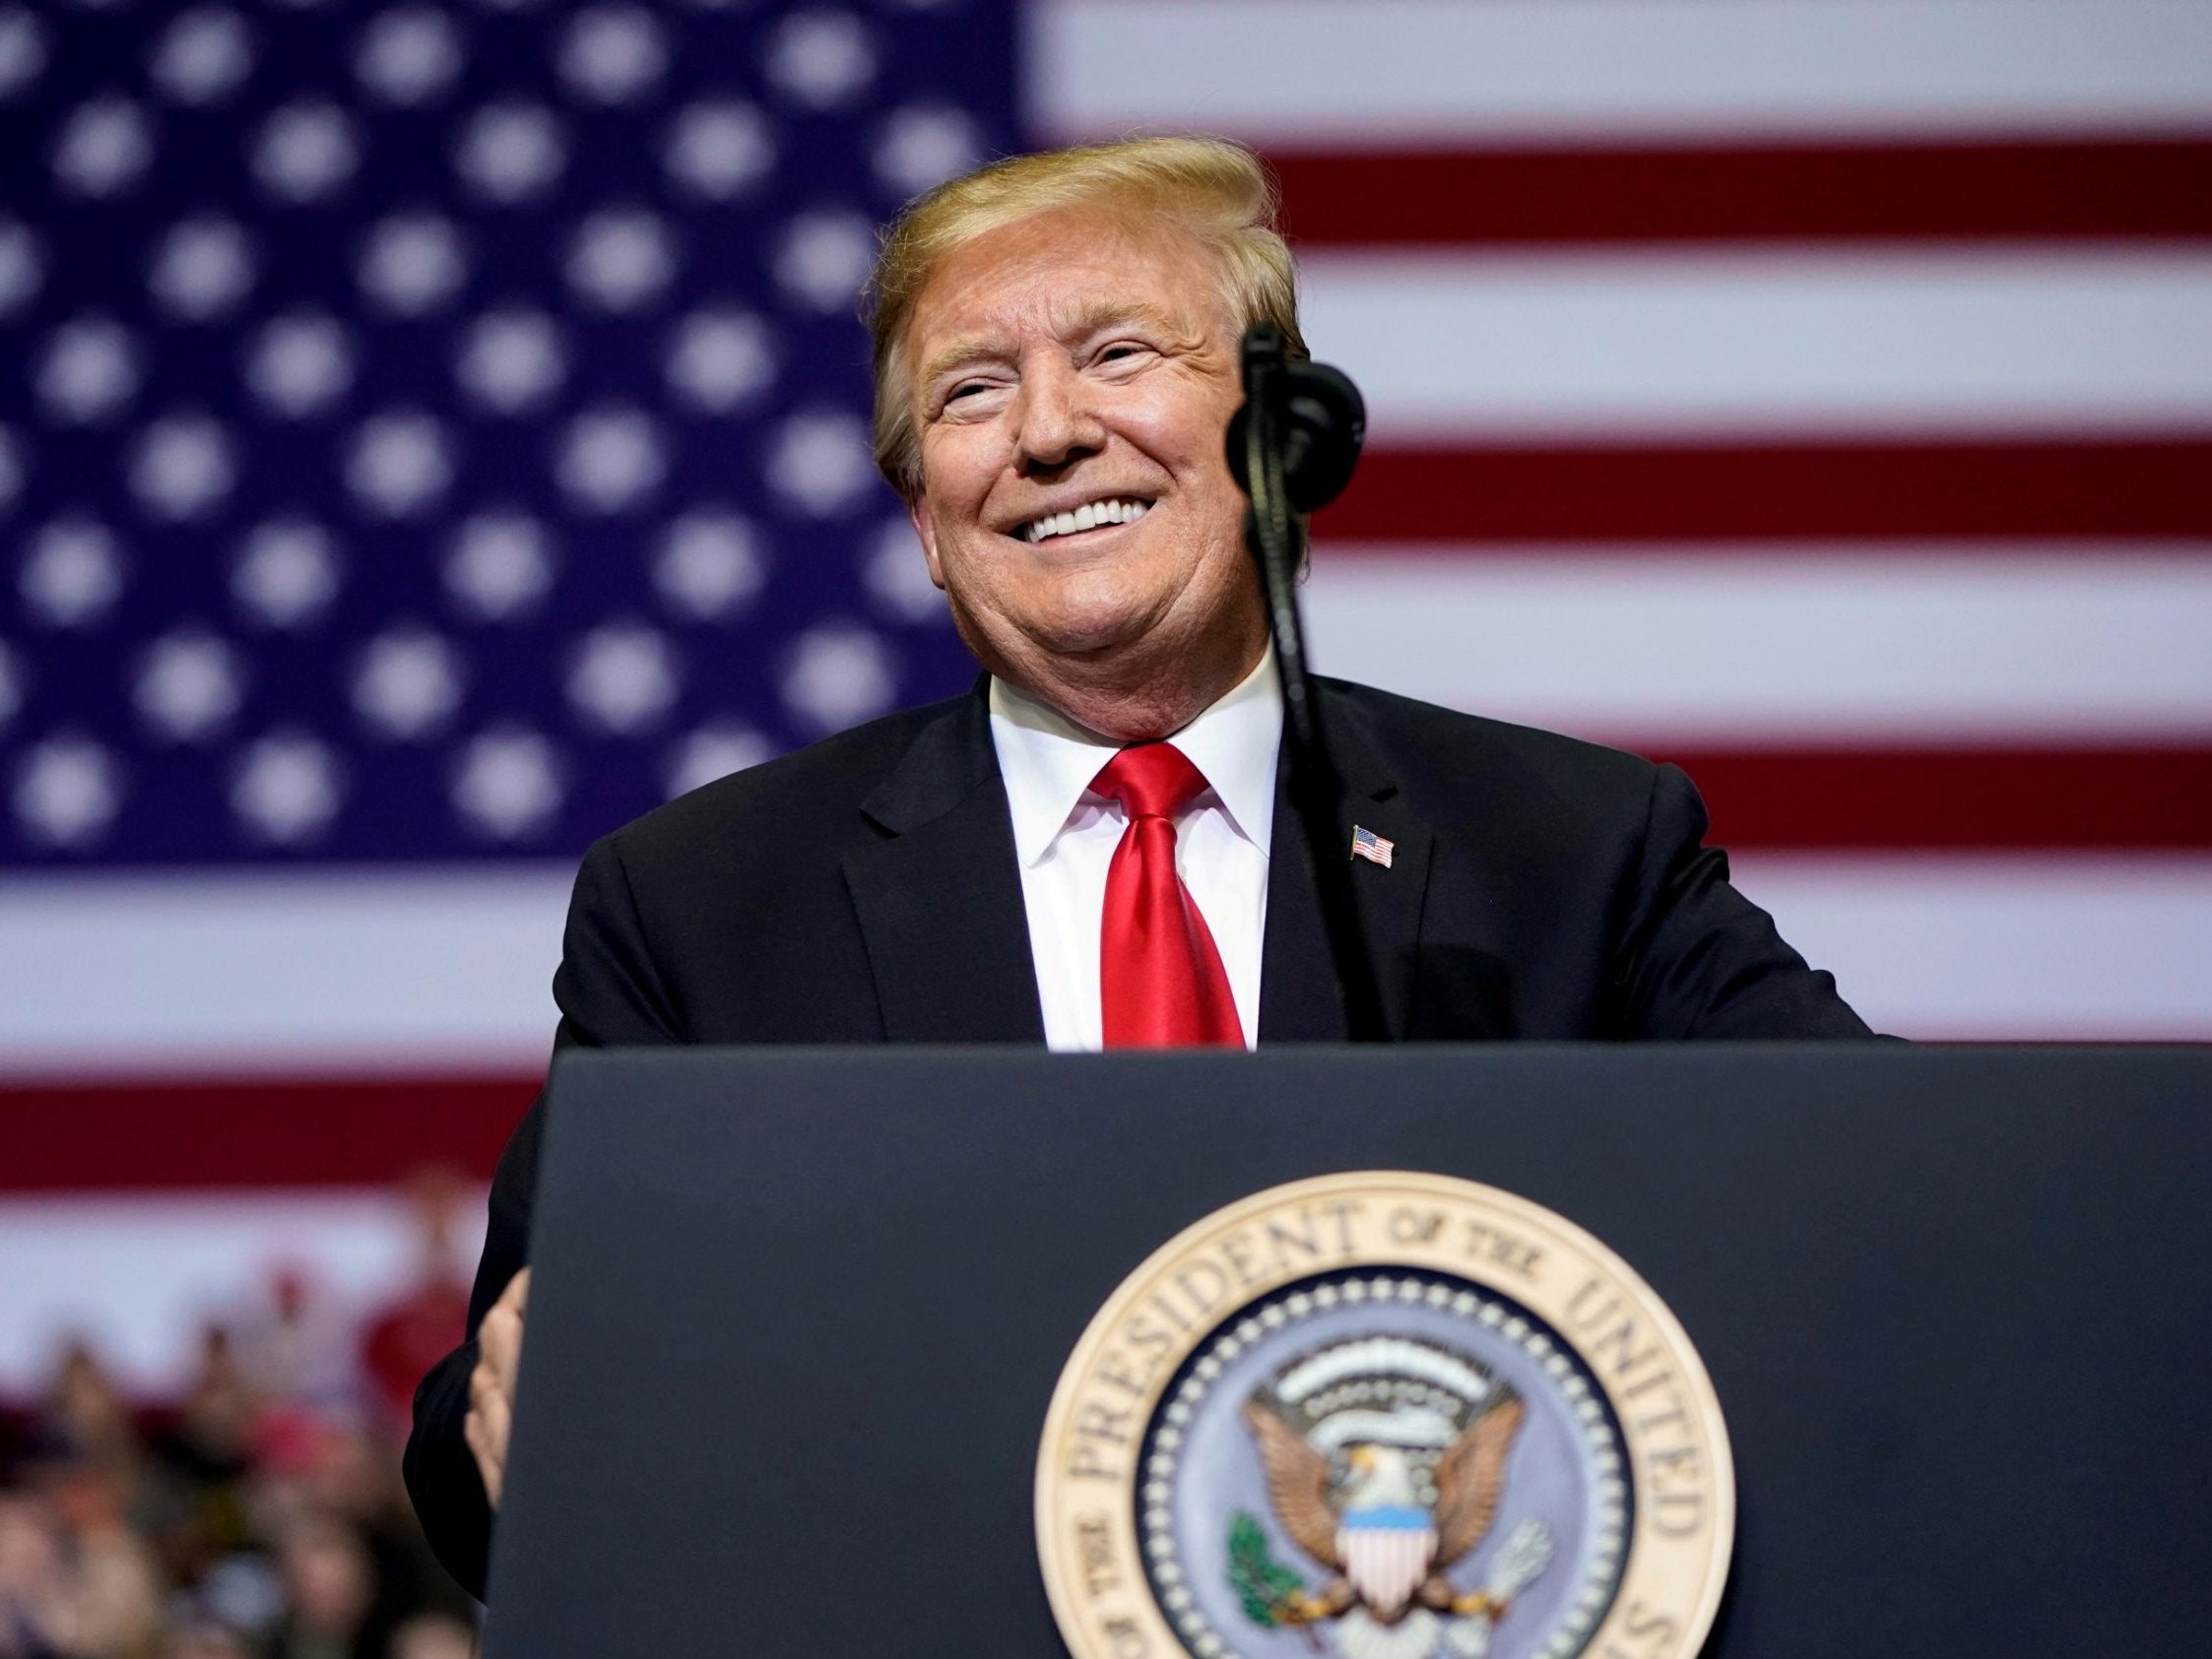 US President Donald Trump speaks during a Make America Great Again rally in Grand Rapids, Michigan, US on 28 March 2019.